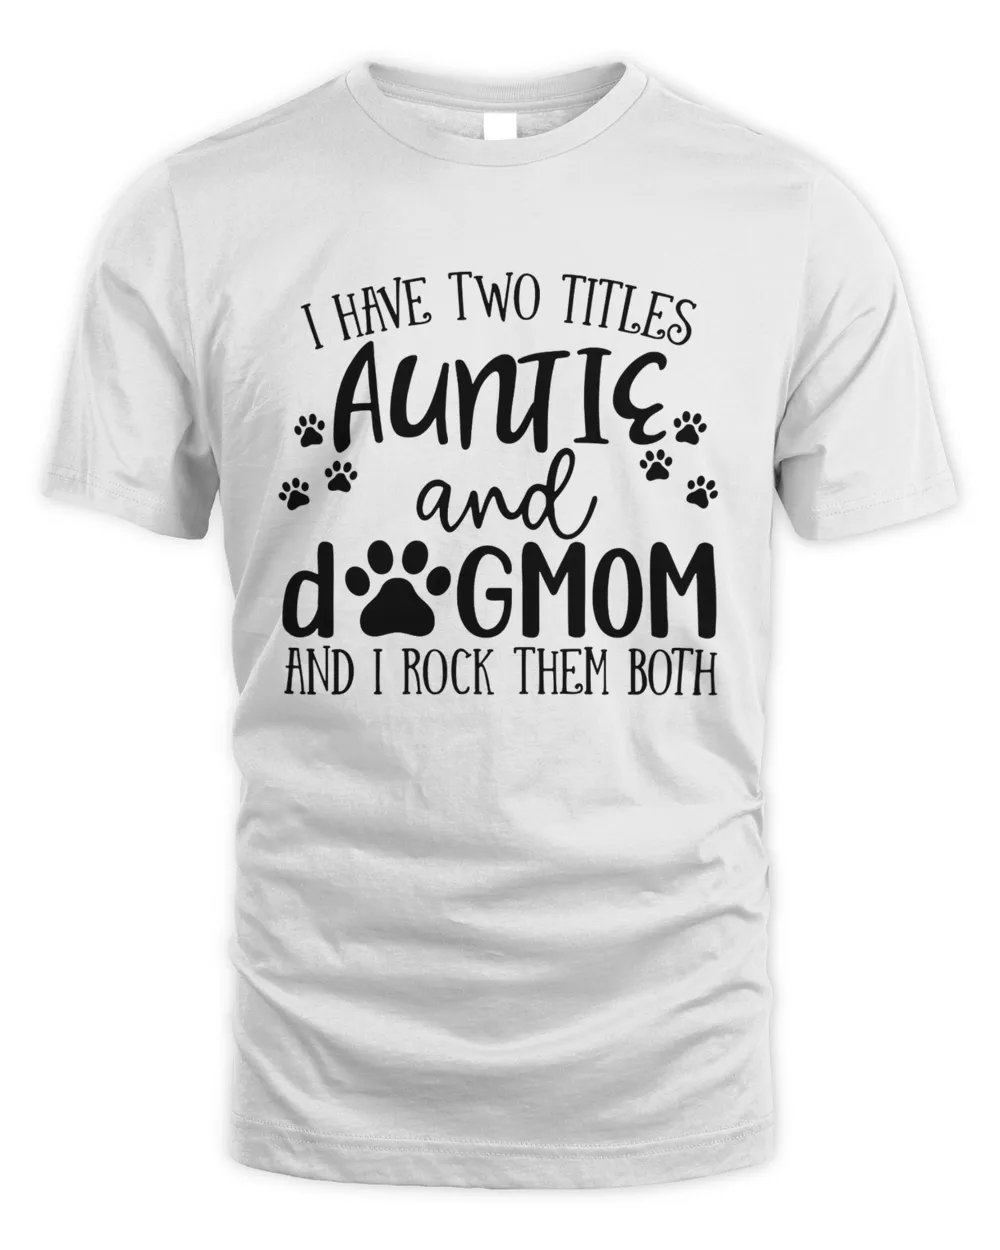 Funny Aunt Tshirt, Aunt Gift, Dog Lover Aunt Shirt, Dog Mom & Auntie shirt, Aunt and Dog Mom Tshirt, Shirt for Aunt, Aunt Birthday